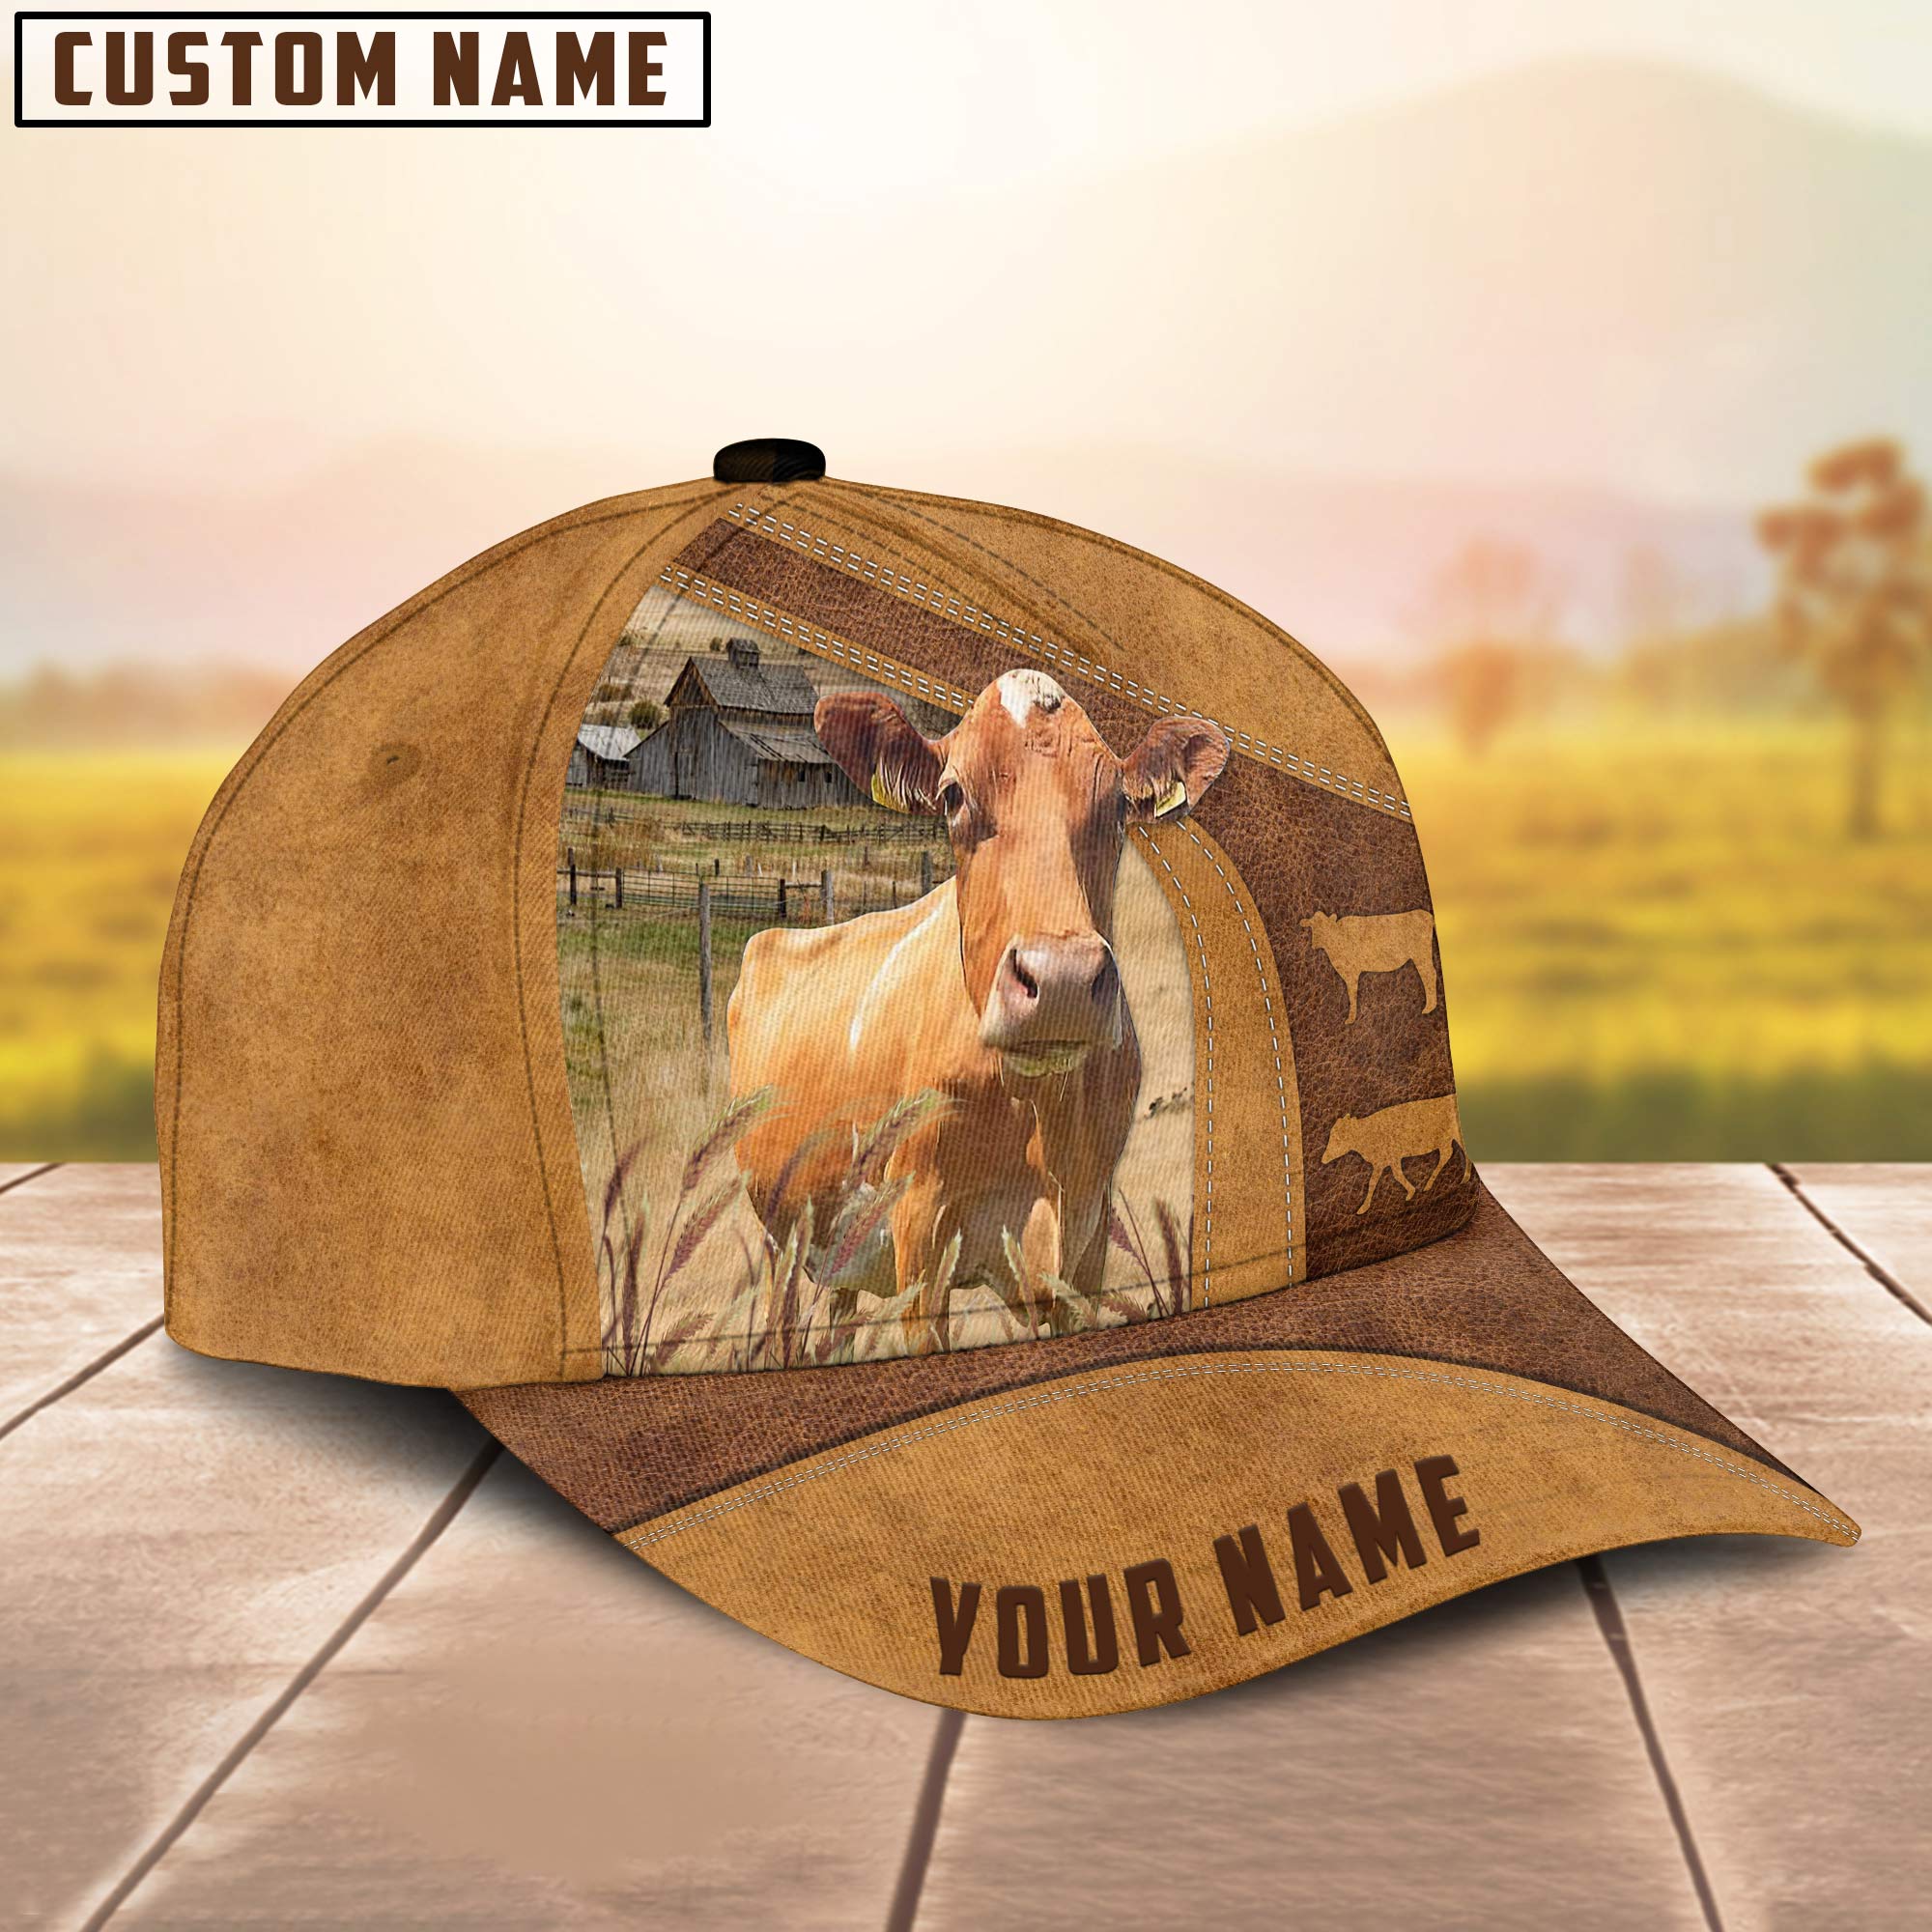 Personalized Name Guernsey Cattle Cap/ Cattle Hat/ Farm Baseball Hat/ Cap Hat For Farmer Farm Lover